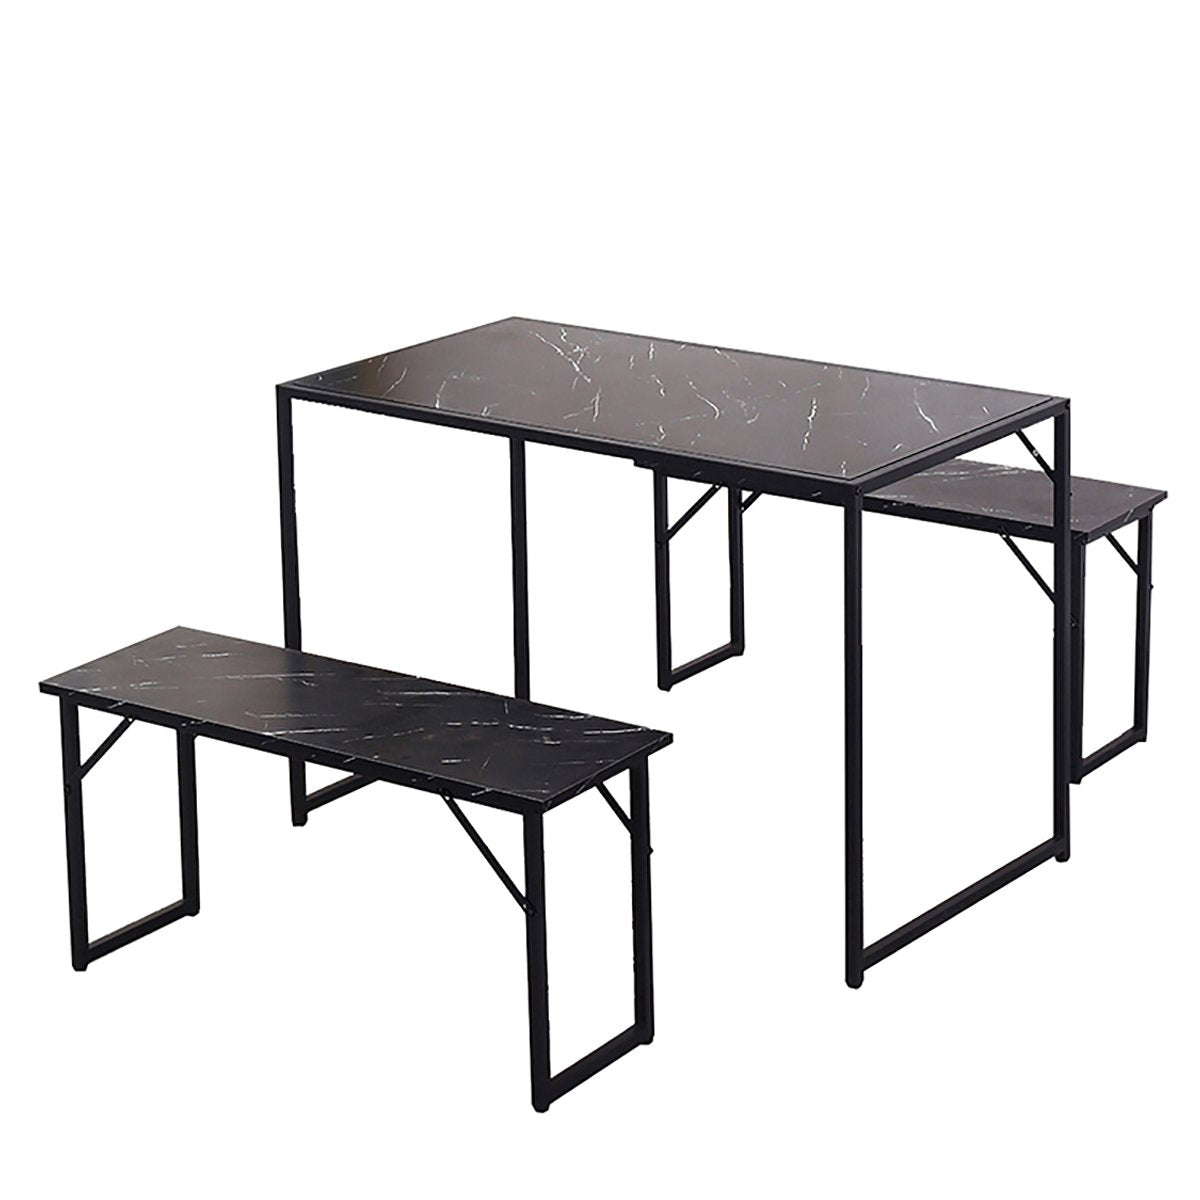 Snailhome® Dining Table Set With 2 Benches Chairs 3PCS